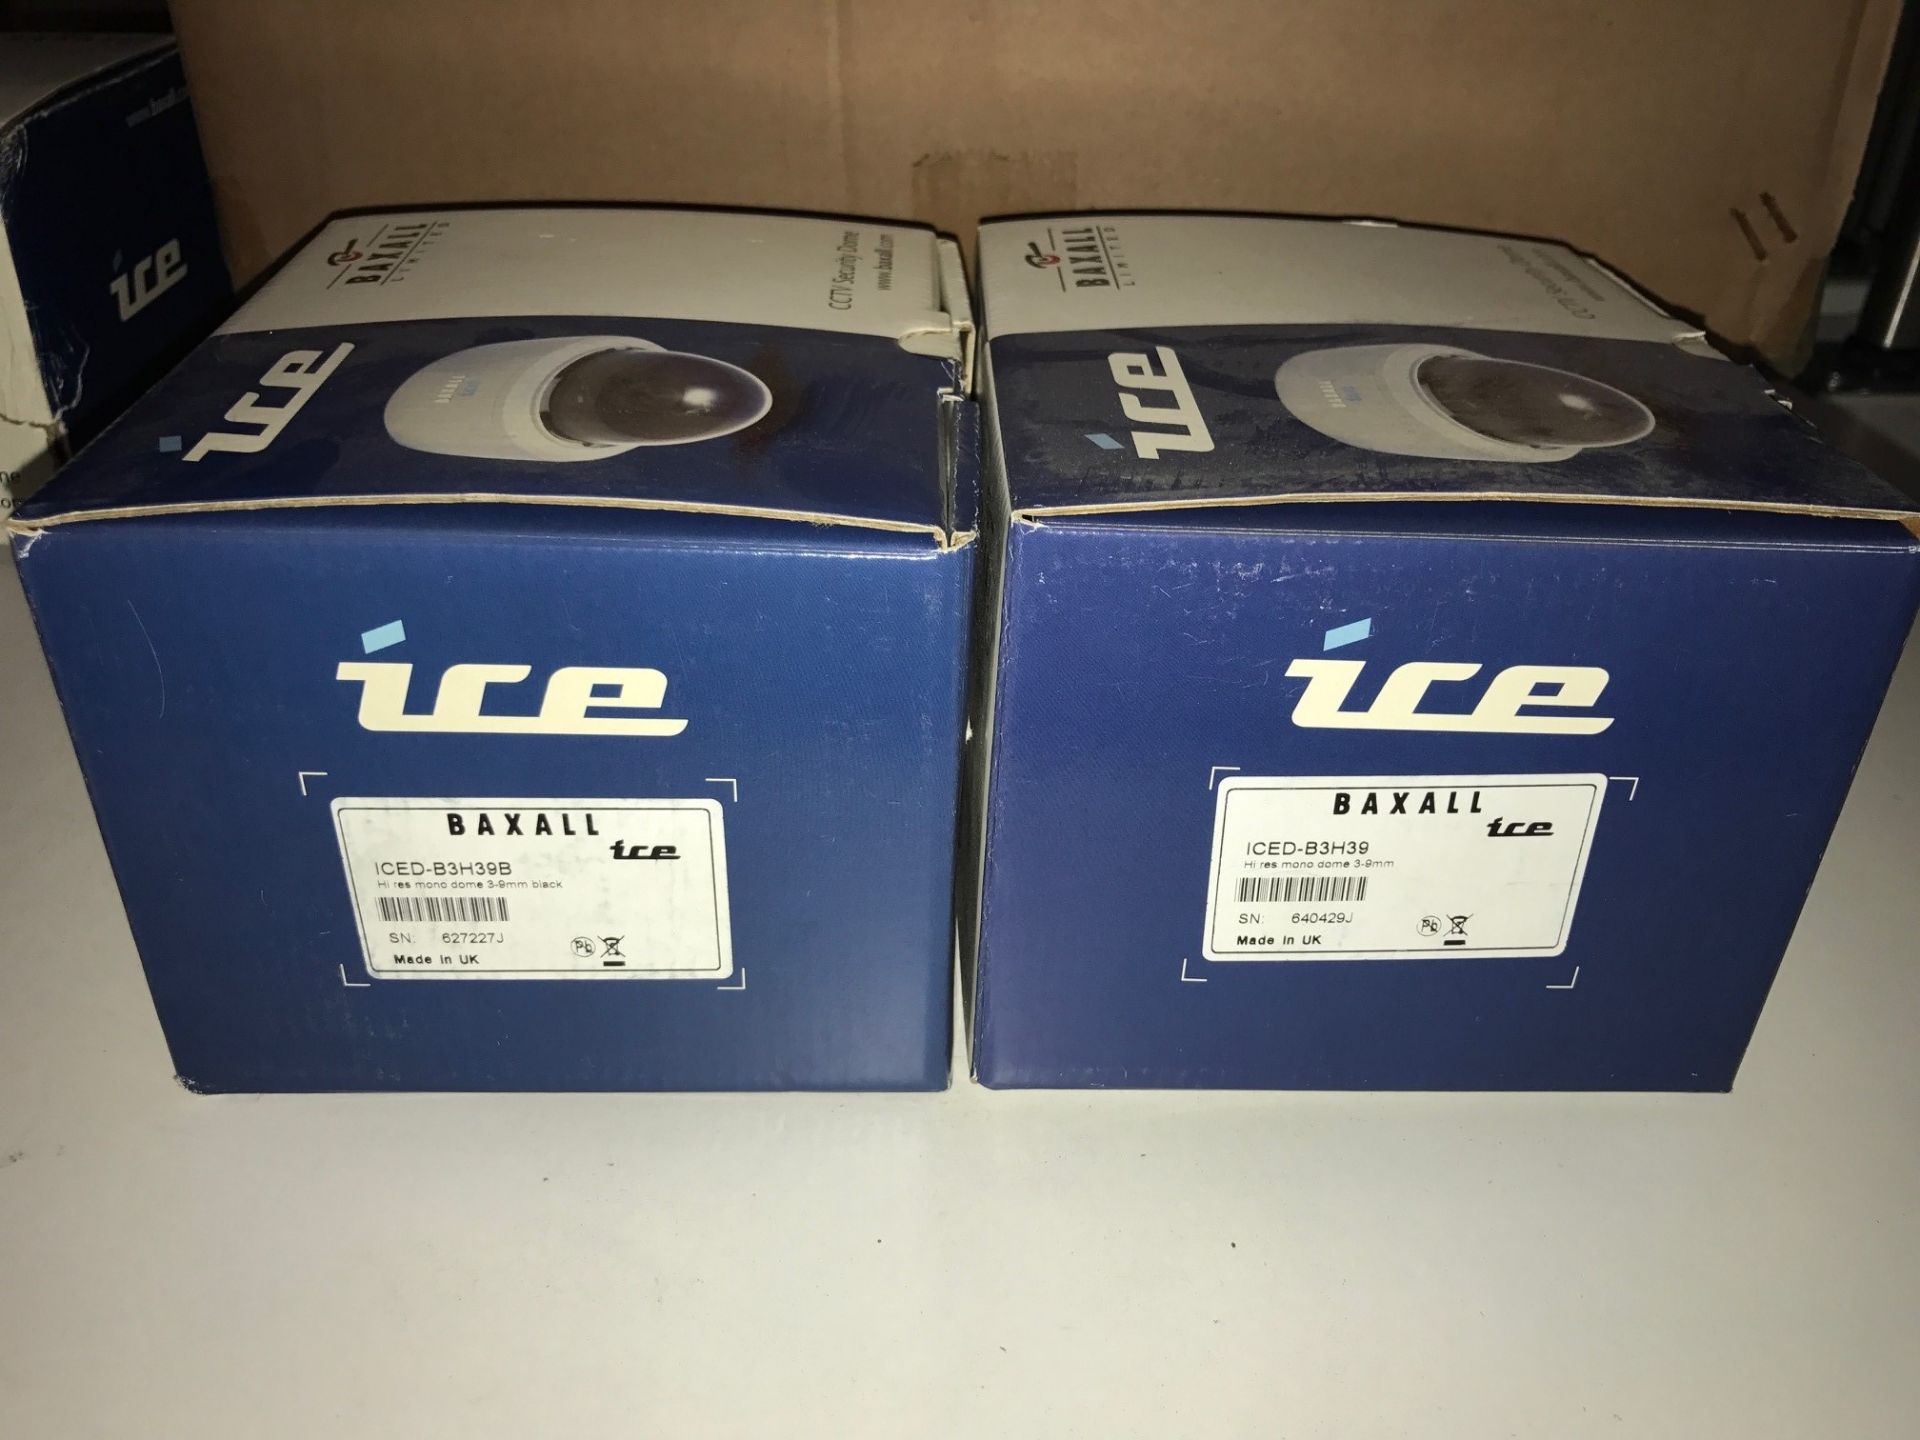 2 x Baxall ICED-B3H39 Hi Res Dome Cameras 3-9mm (Brand New & Boxed) - Image 2 of 3